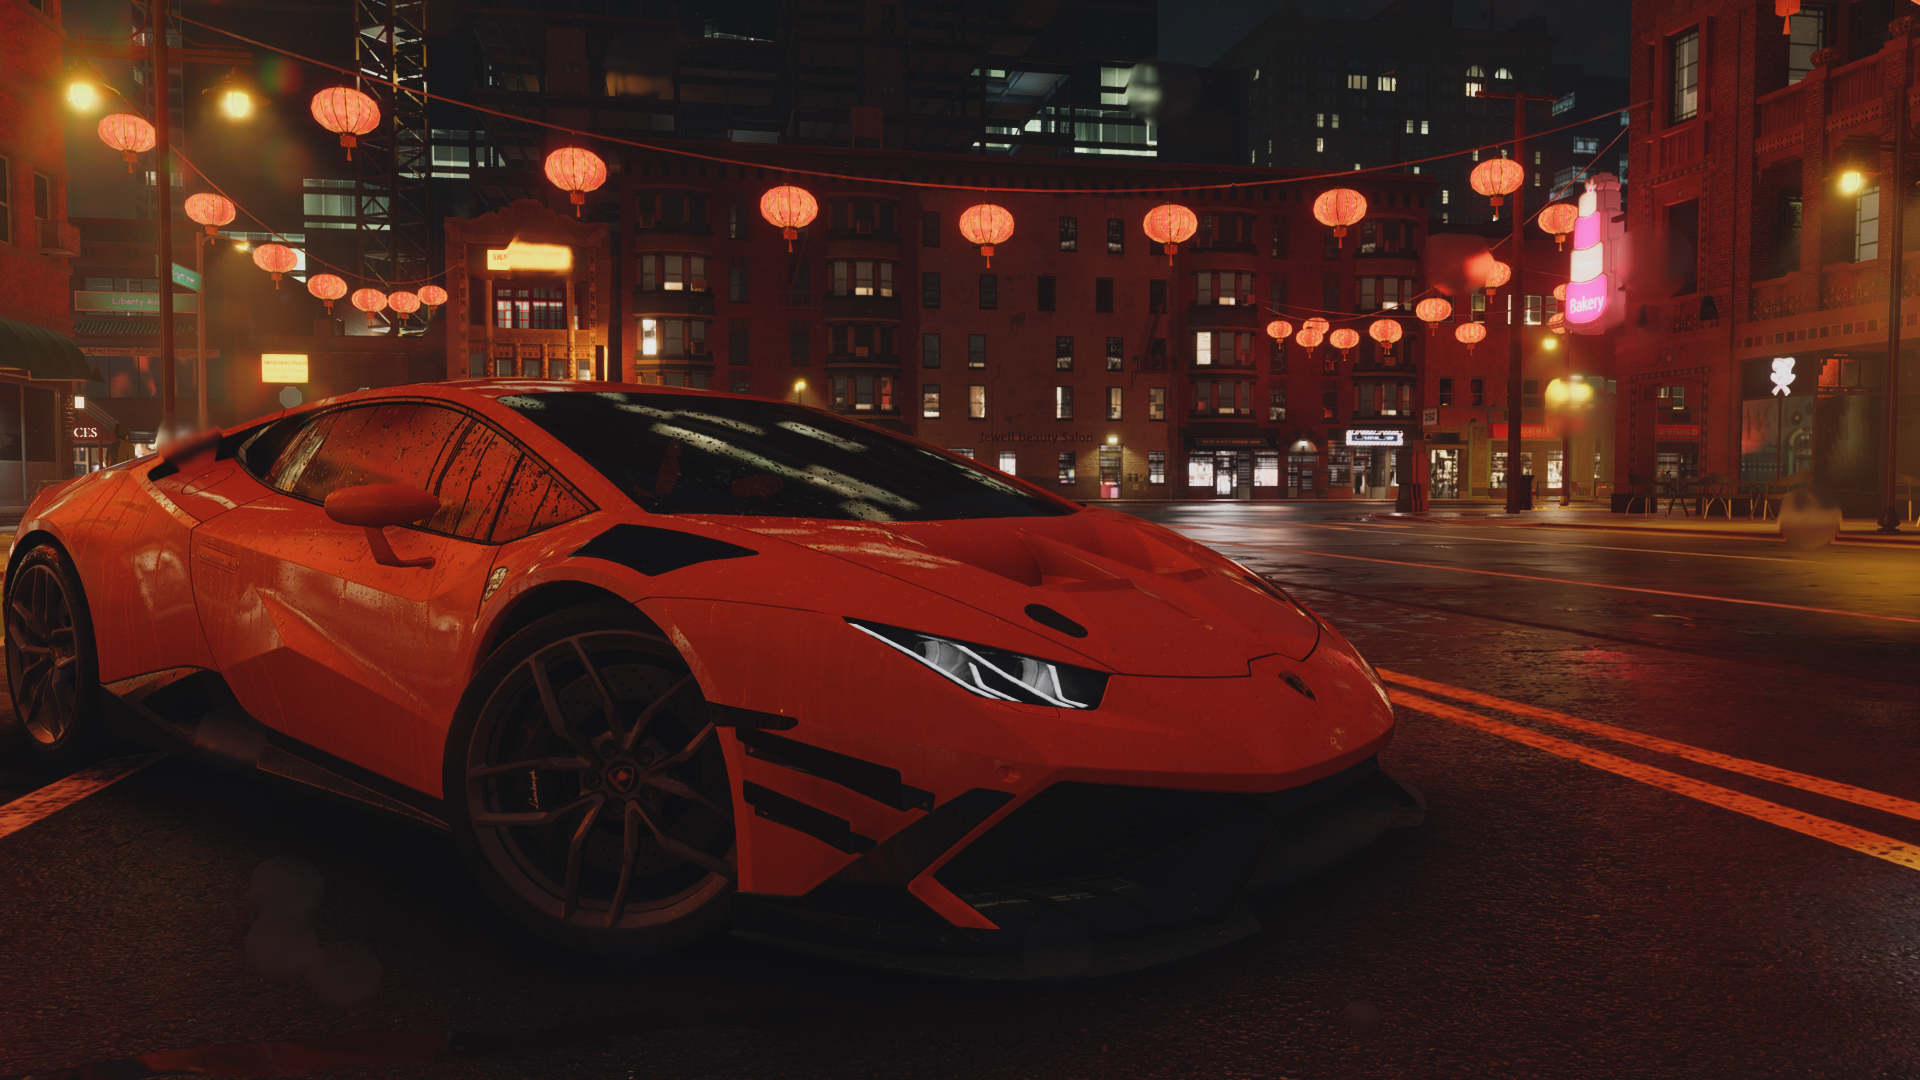 General 1920x1080 Need for speed Unbound screen shot PC gaming Need for Speed CGI frontal view car video game art night video games building city city lights street light vehicle road